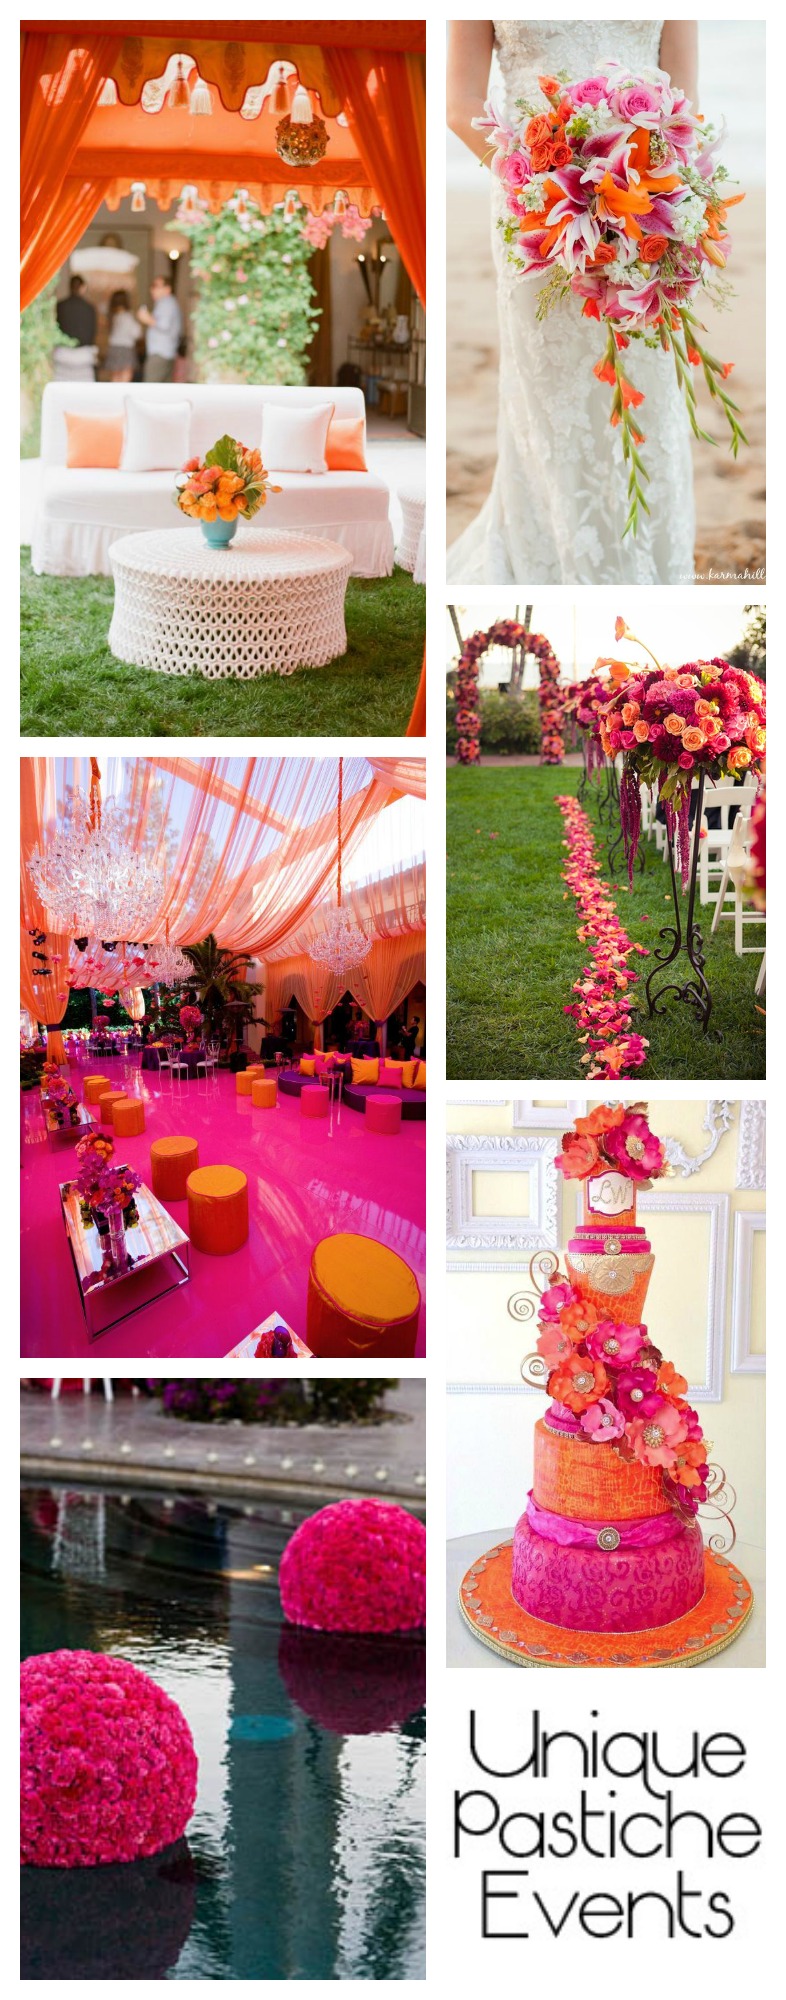 Hot Pink and Orange Summer Wedding Ideas Find out who made what in this wedding idea board: https://uniquepasticheevents.com/2015/07/15/hot-pink-and-orange-summer-wedding-ideas/